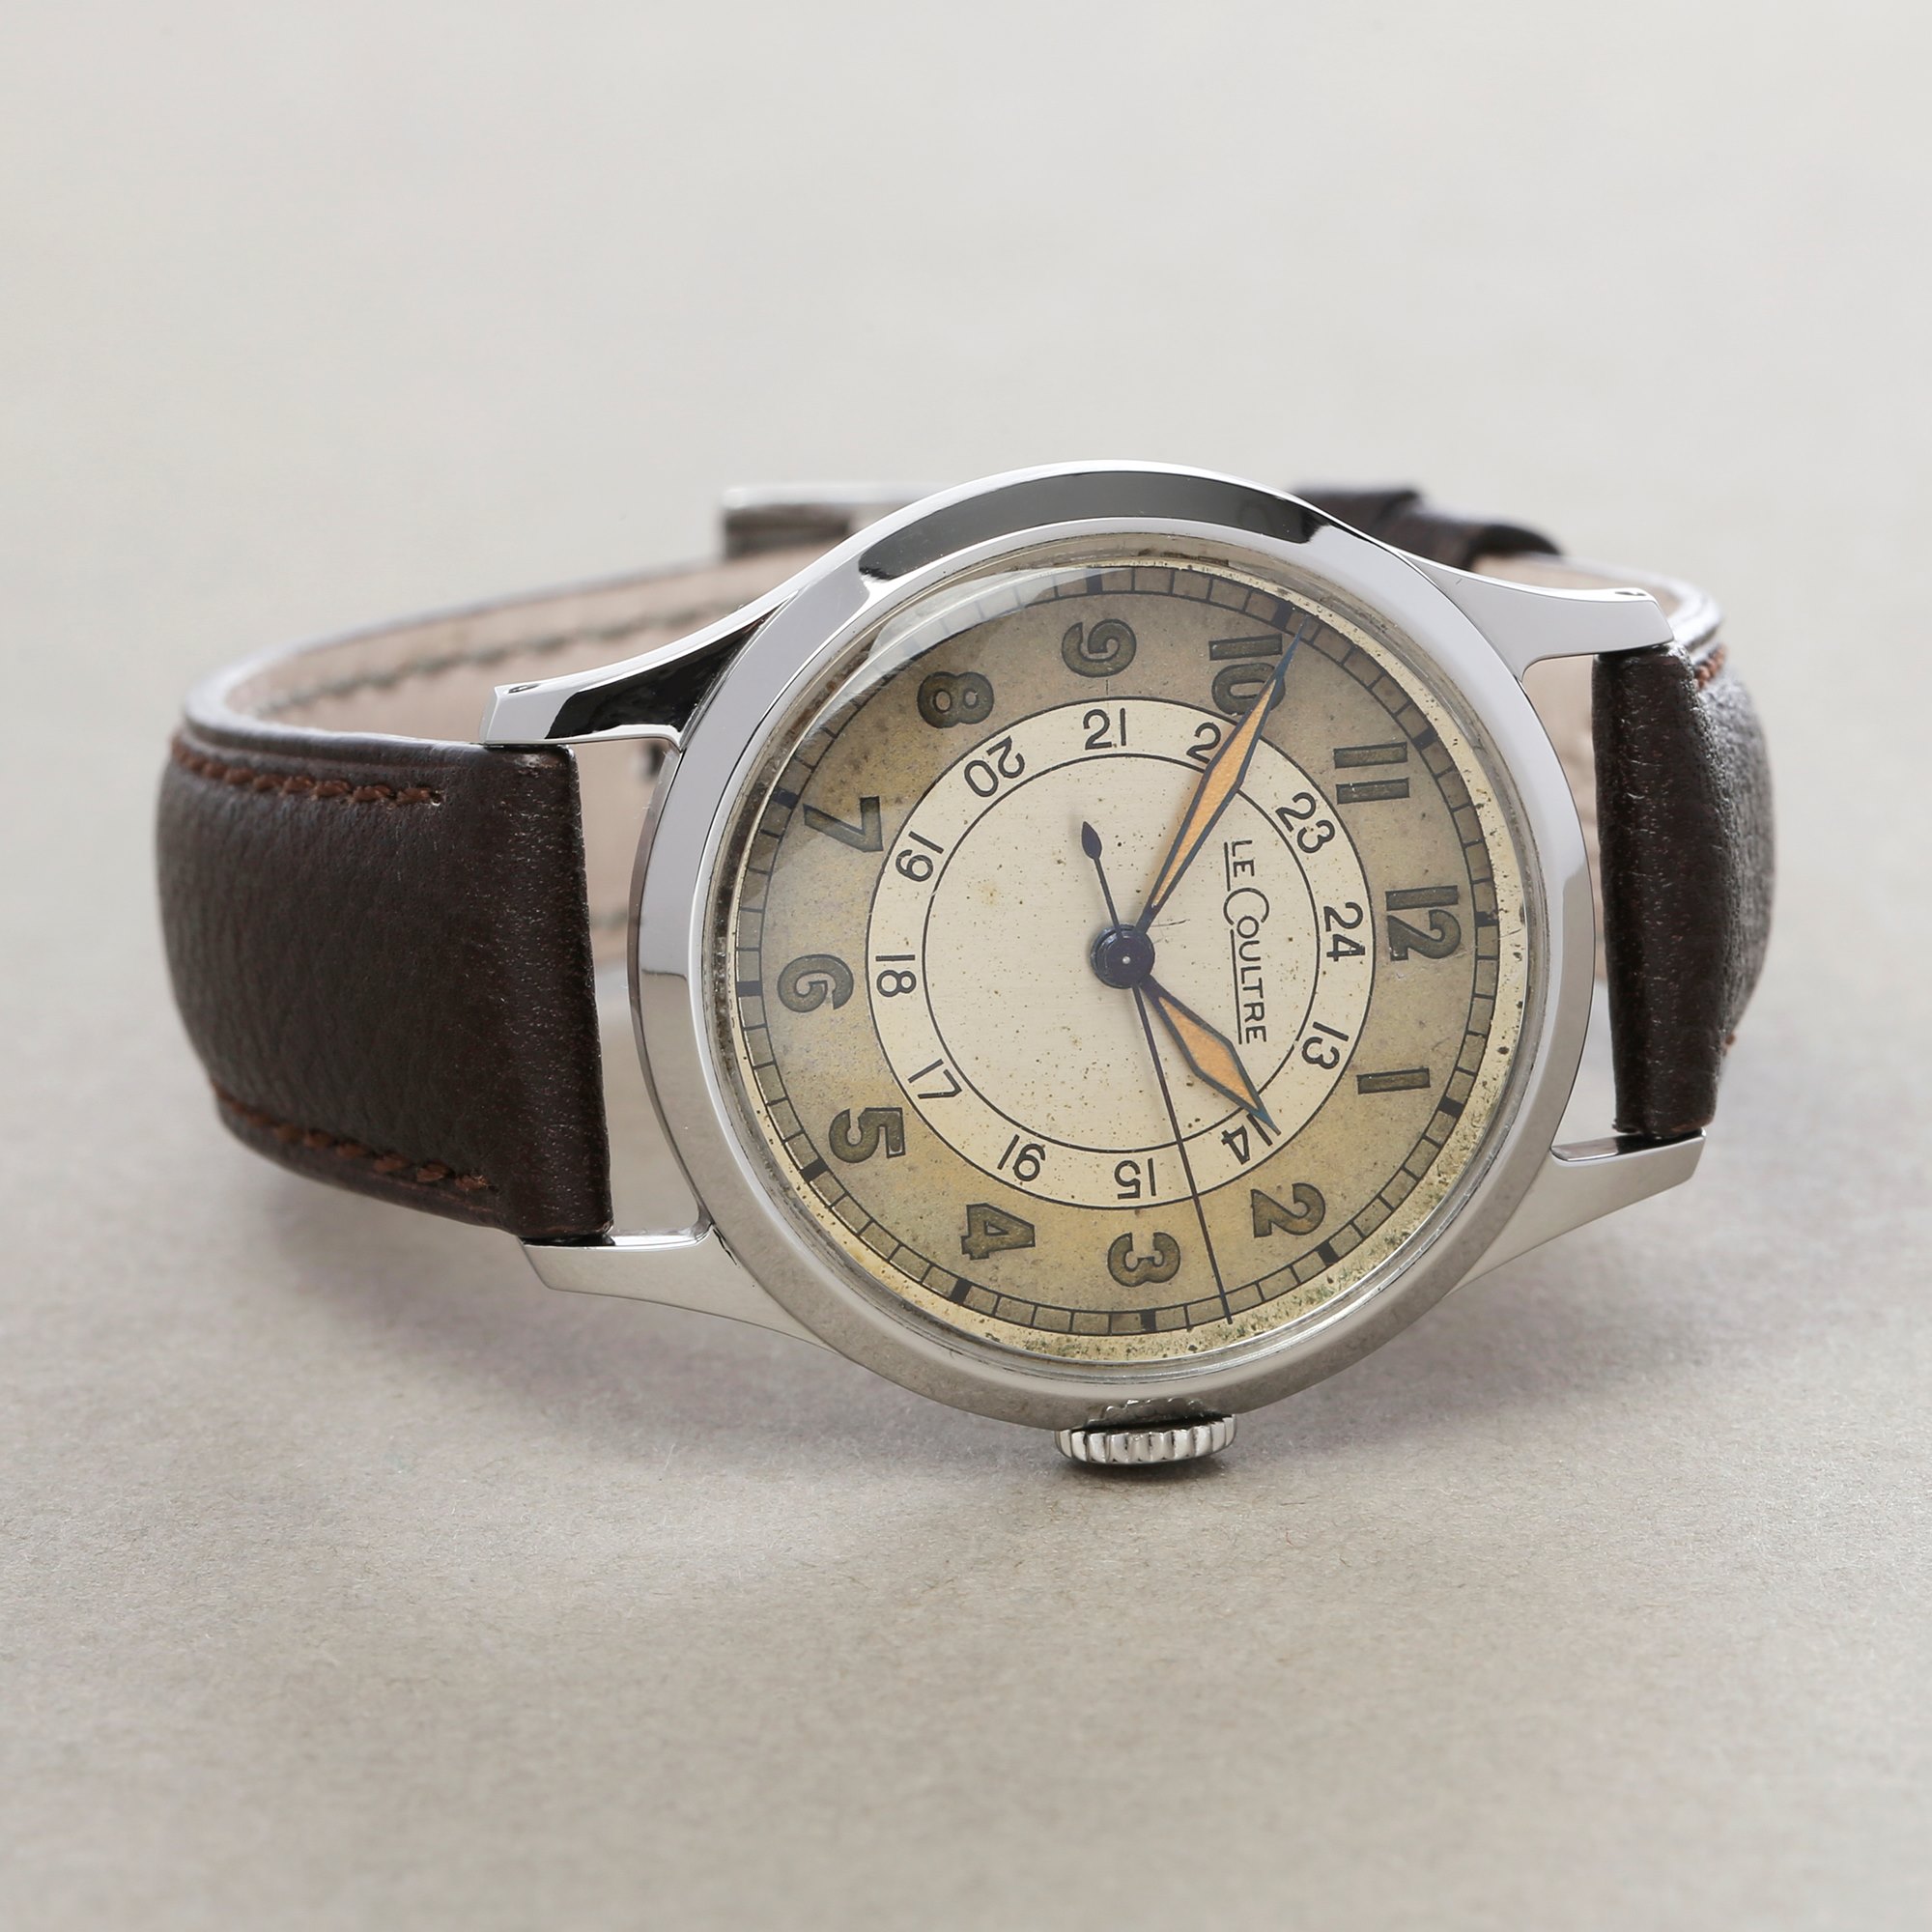 Jaeger-LeCoultre Vintage Stainless Steel 450/3A